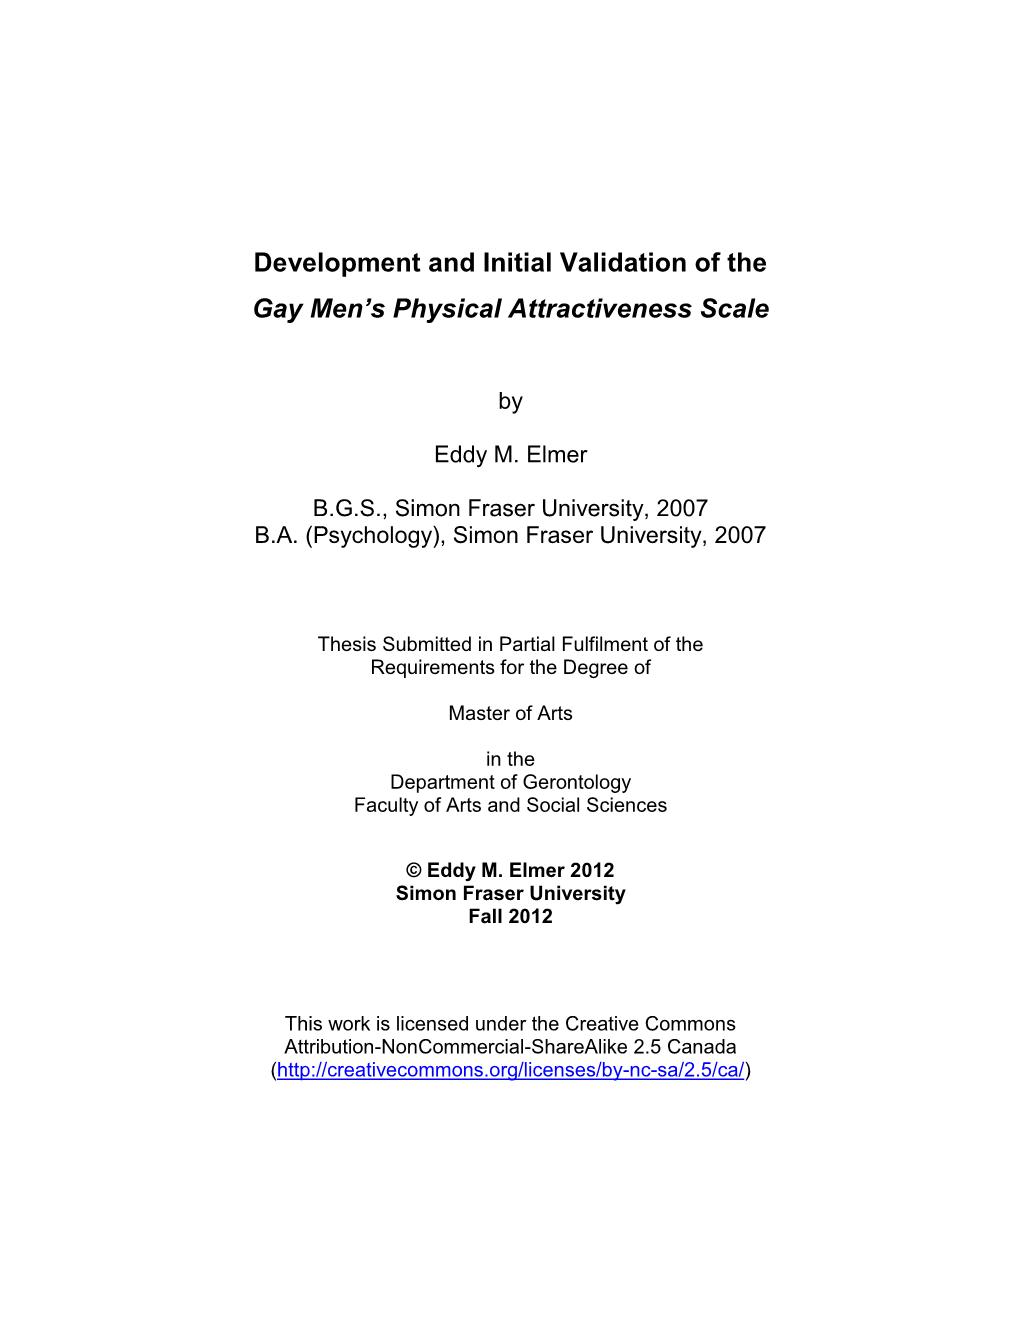 Development and Initial Validation of the Gay Men's Physical